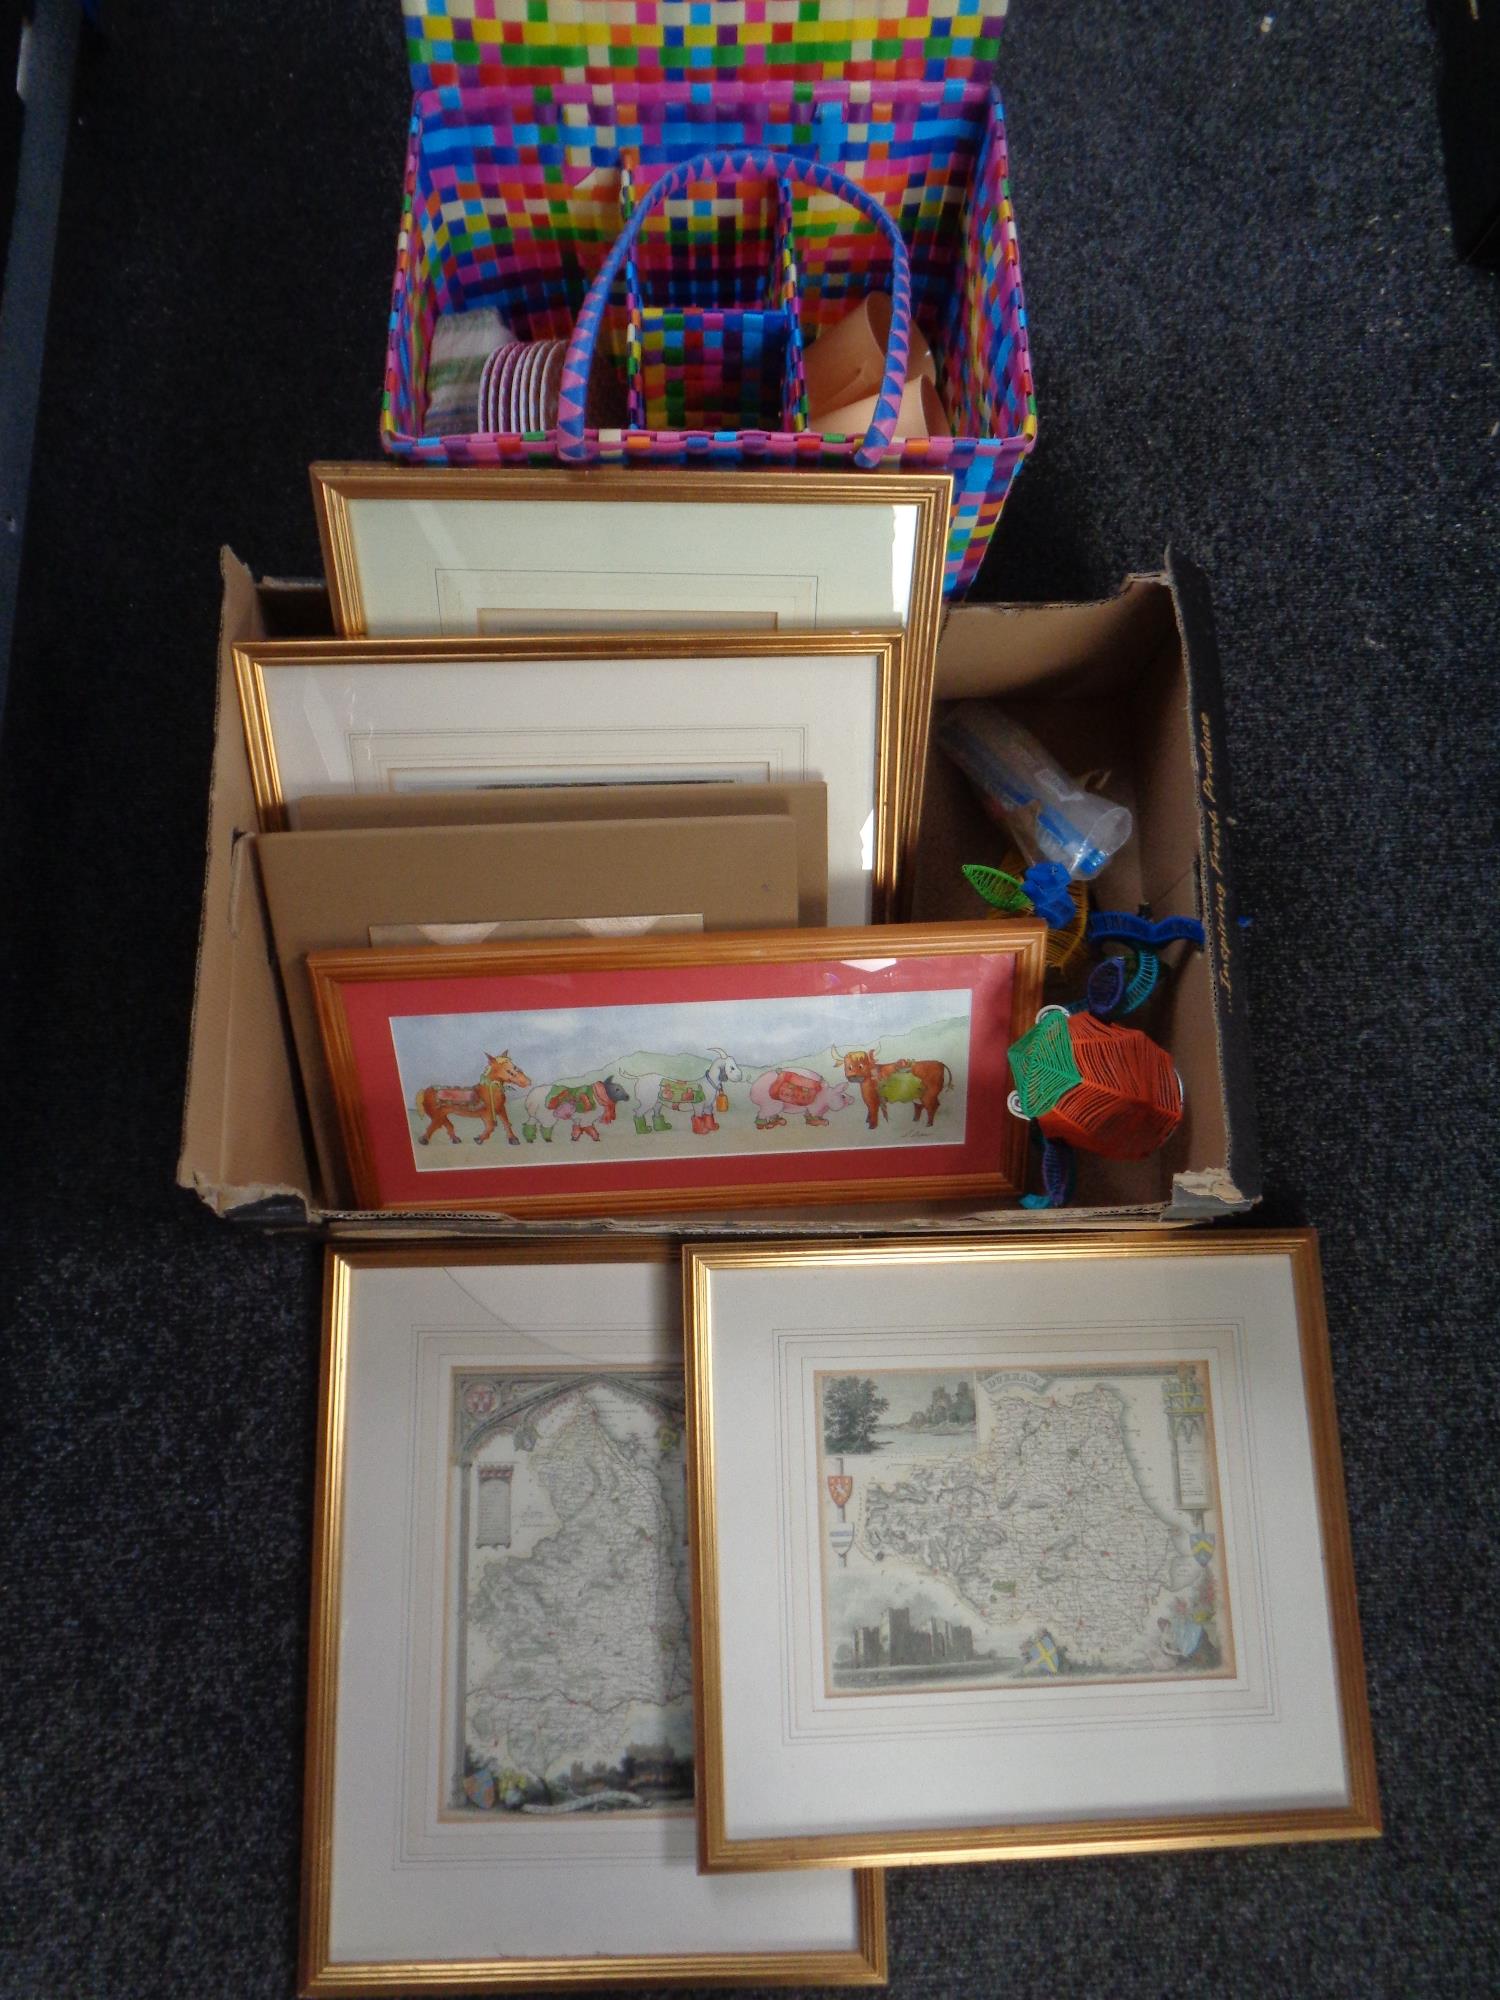 A box of 20th century pictures and prints,